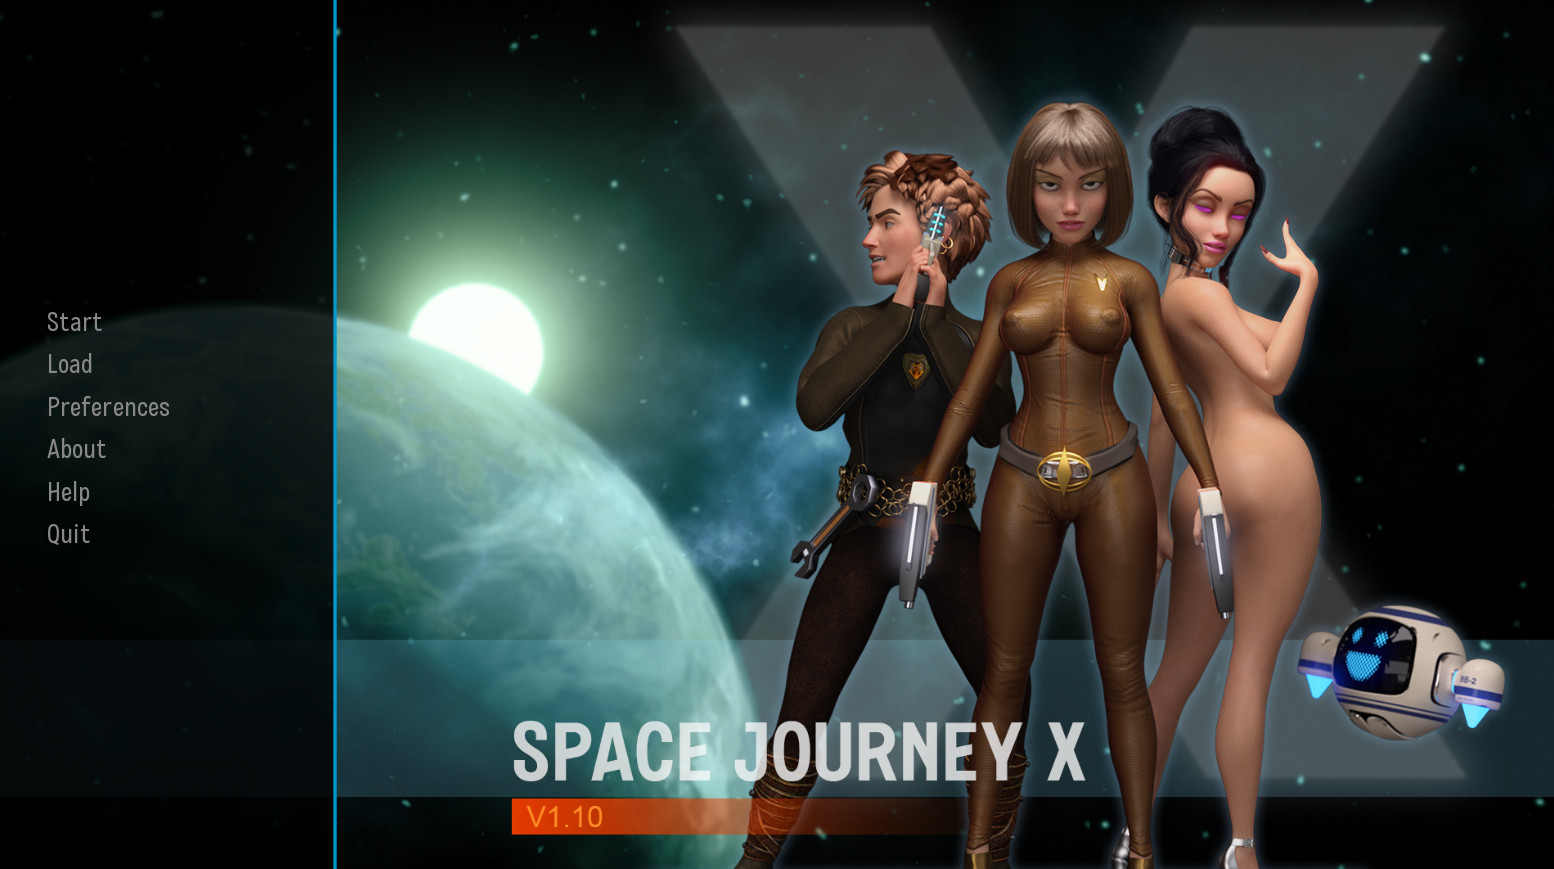 Space Journey X y.v.